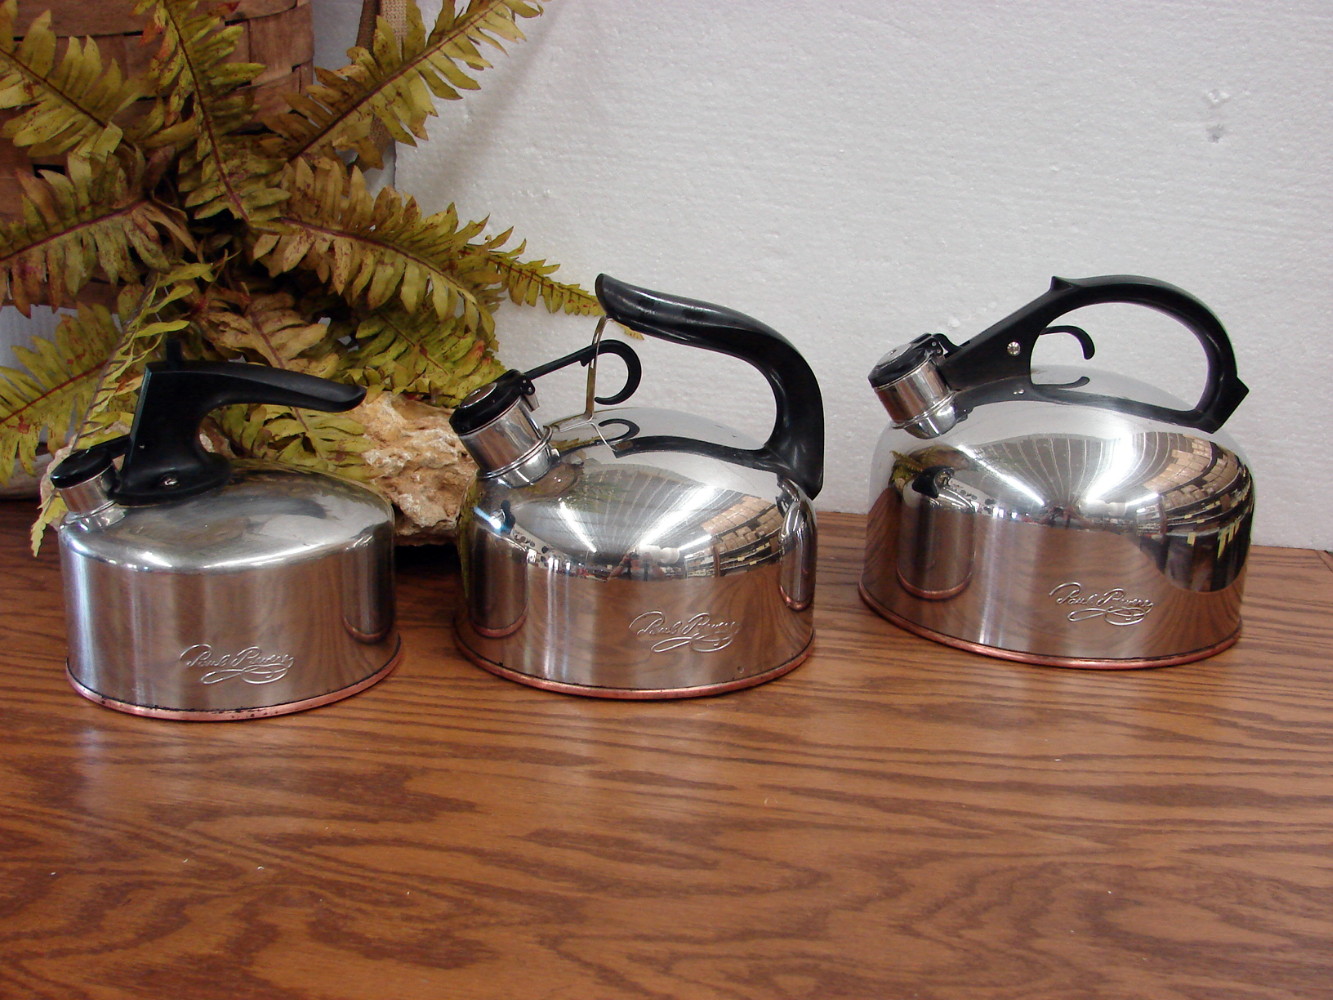 Revere Ware 3 Piece Cookware Copper Bottom W/Lids Stainless Steel